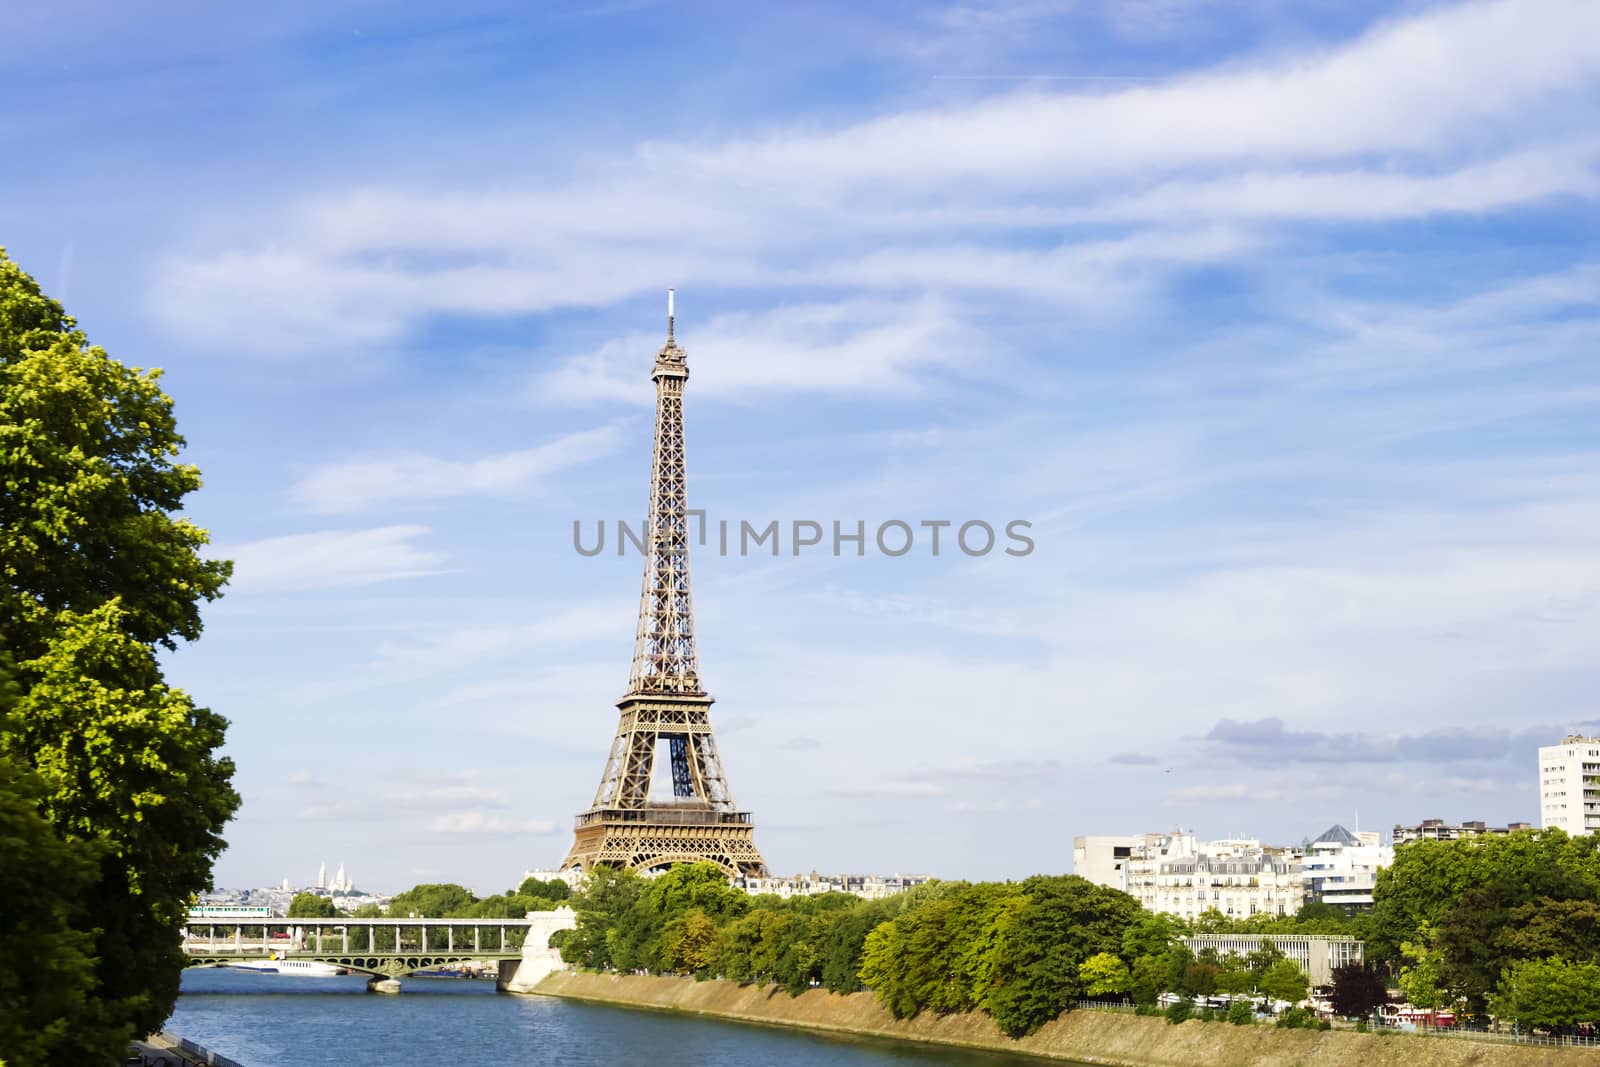 Eiffel Towerfrom the view over Siene, Paris, France